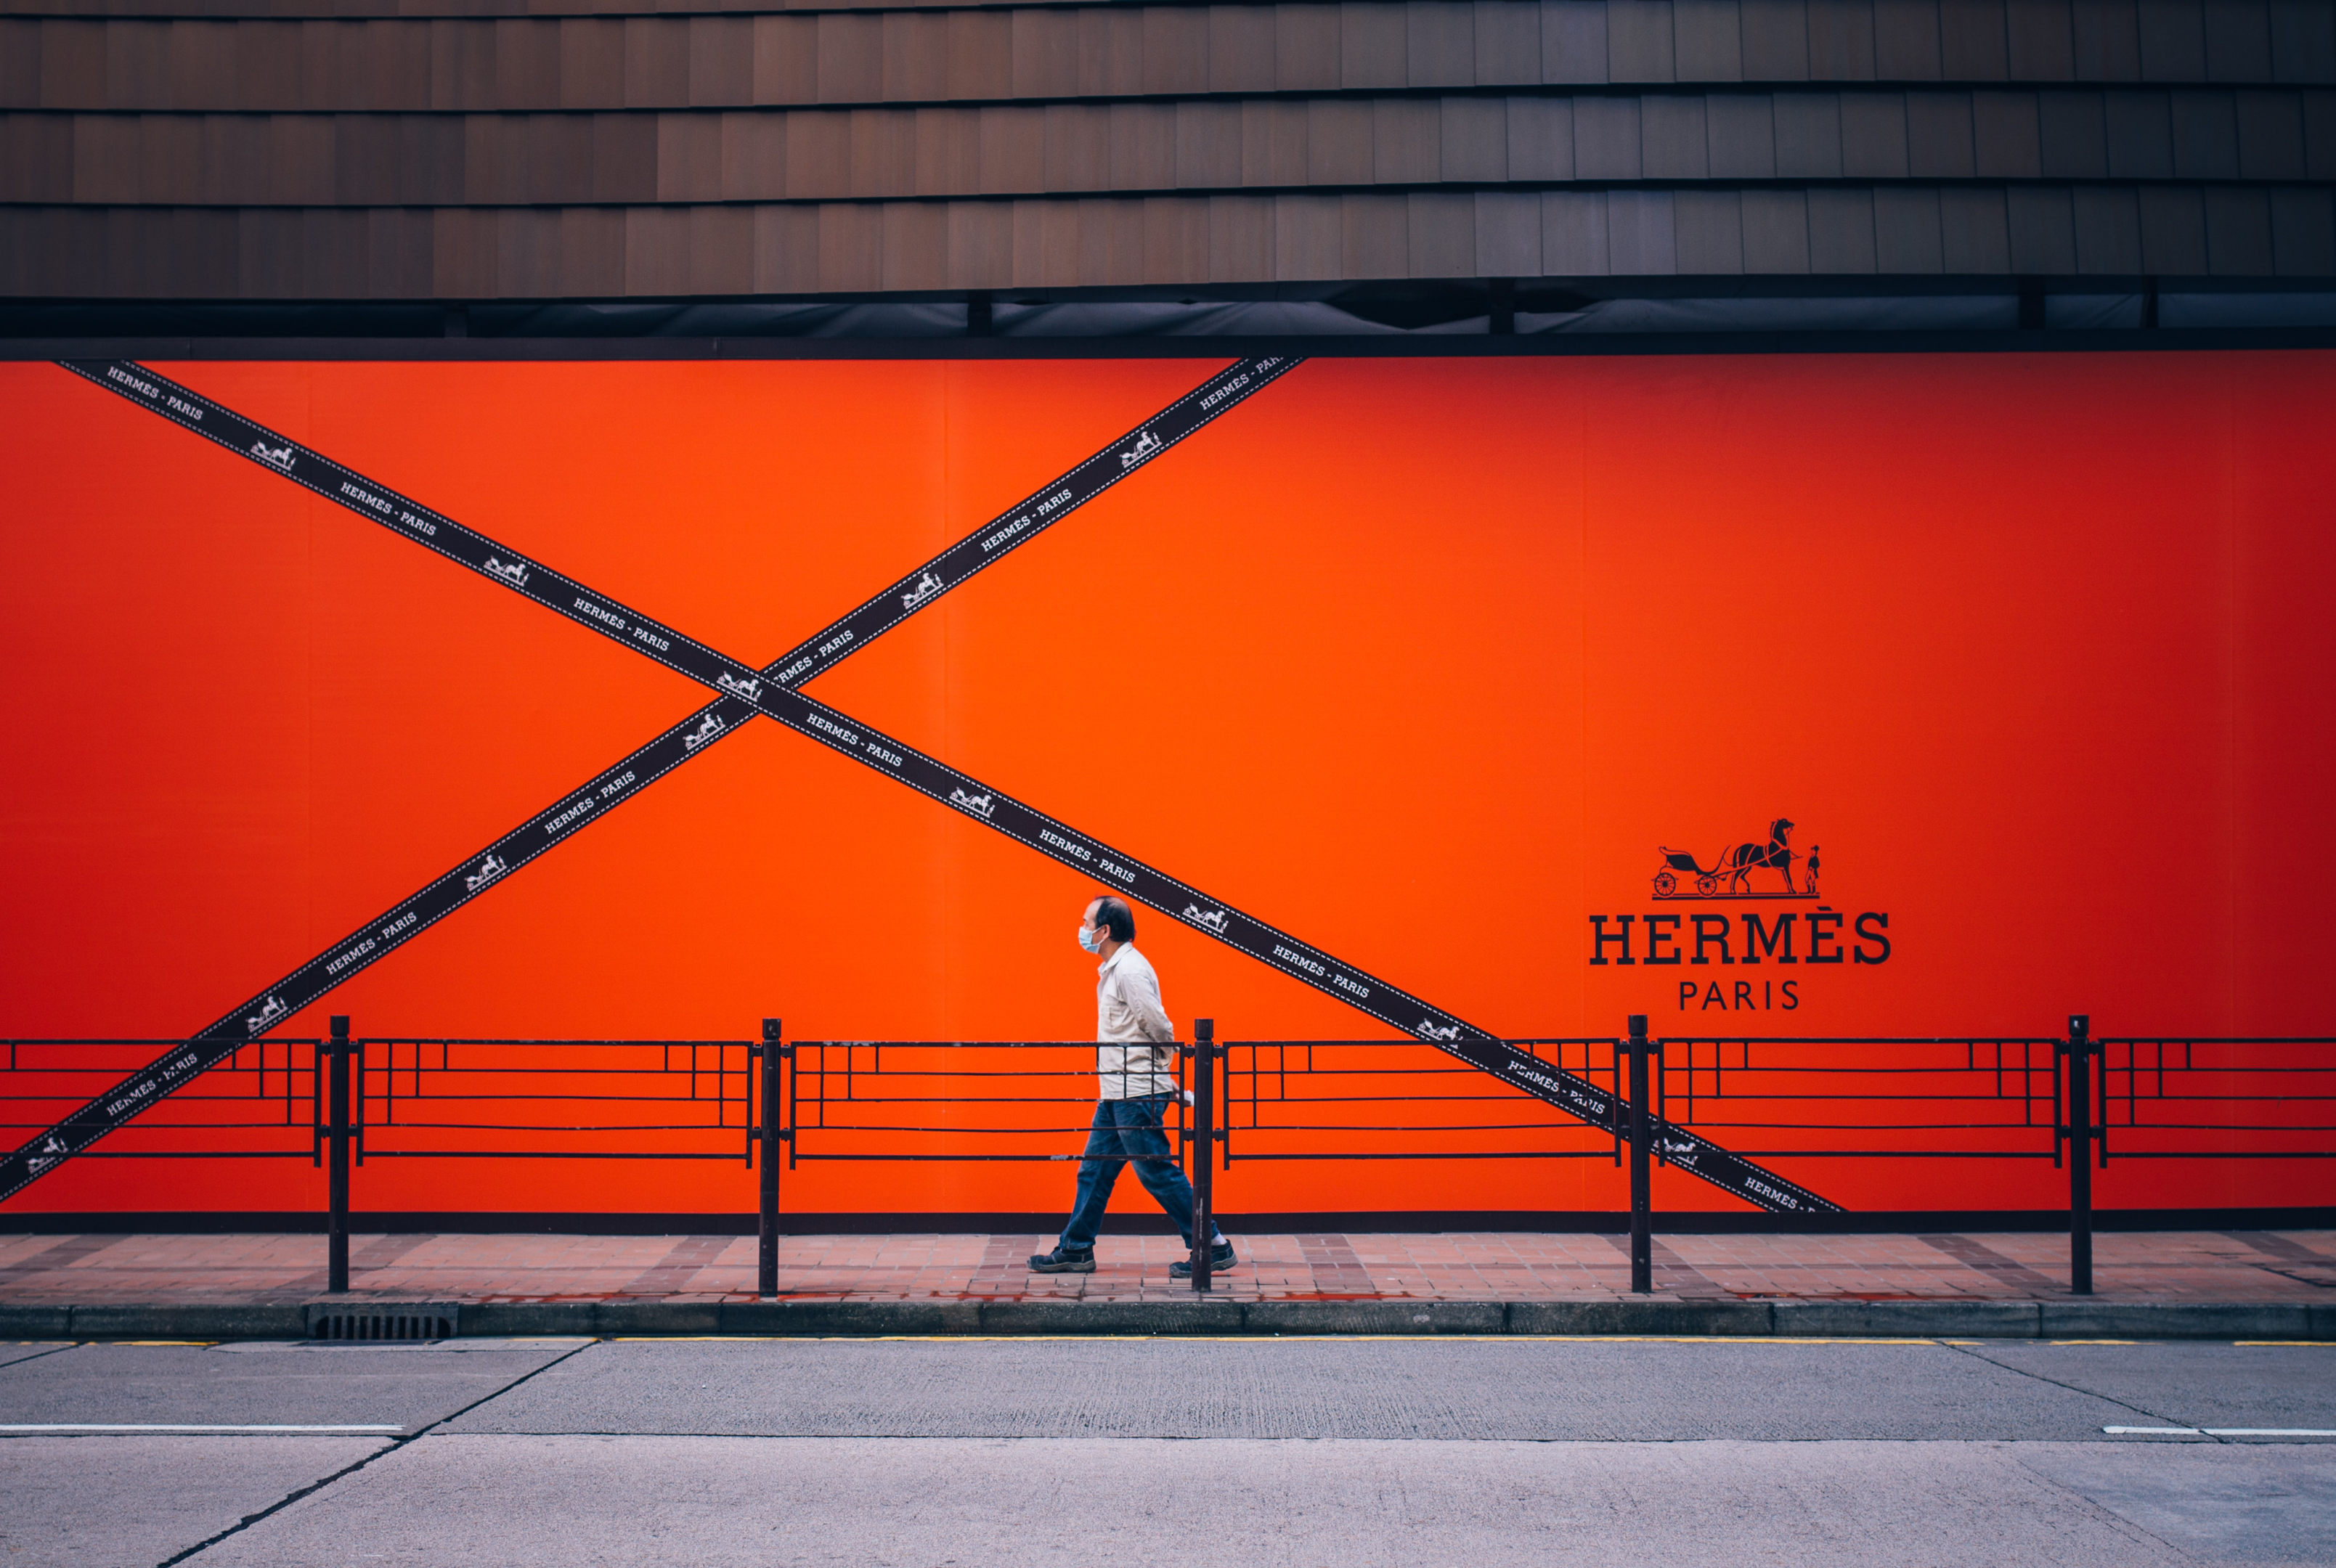 Hermes is a popular luxury brand all over the world | Photo by Chi Lok TSANG from Unsplash